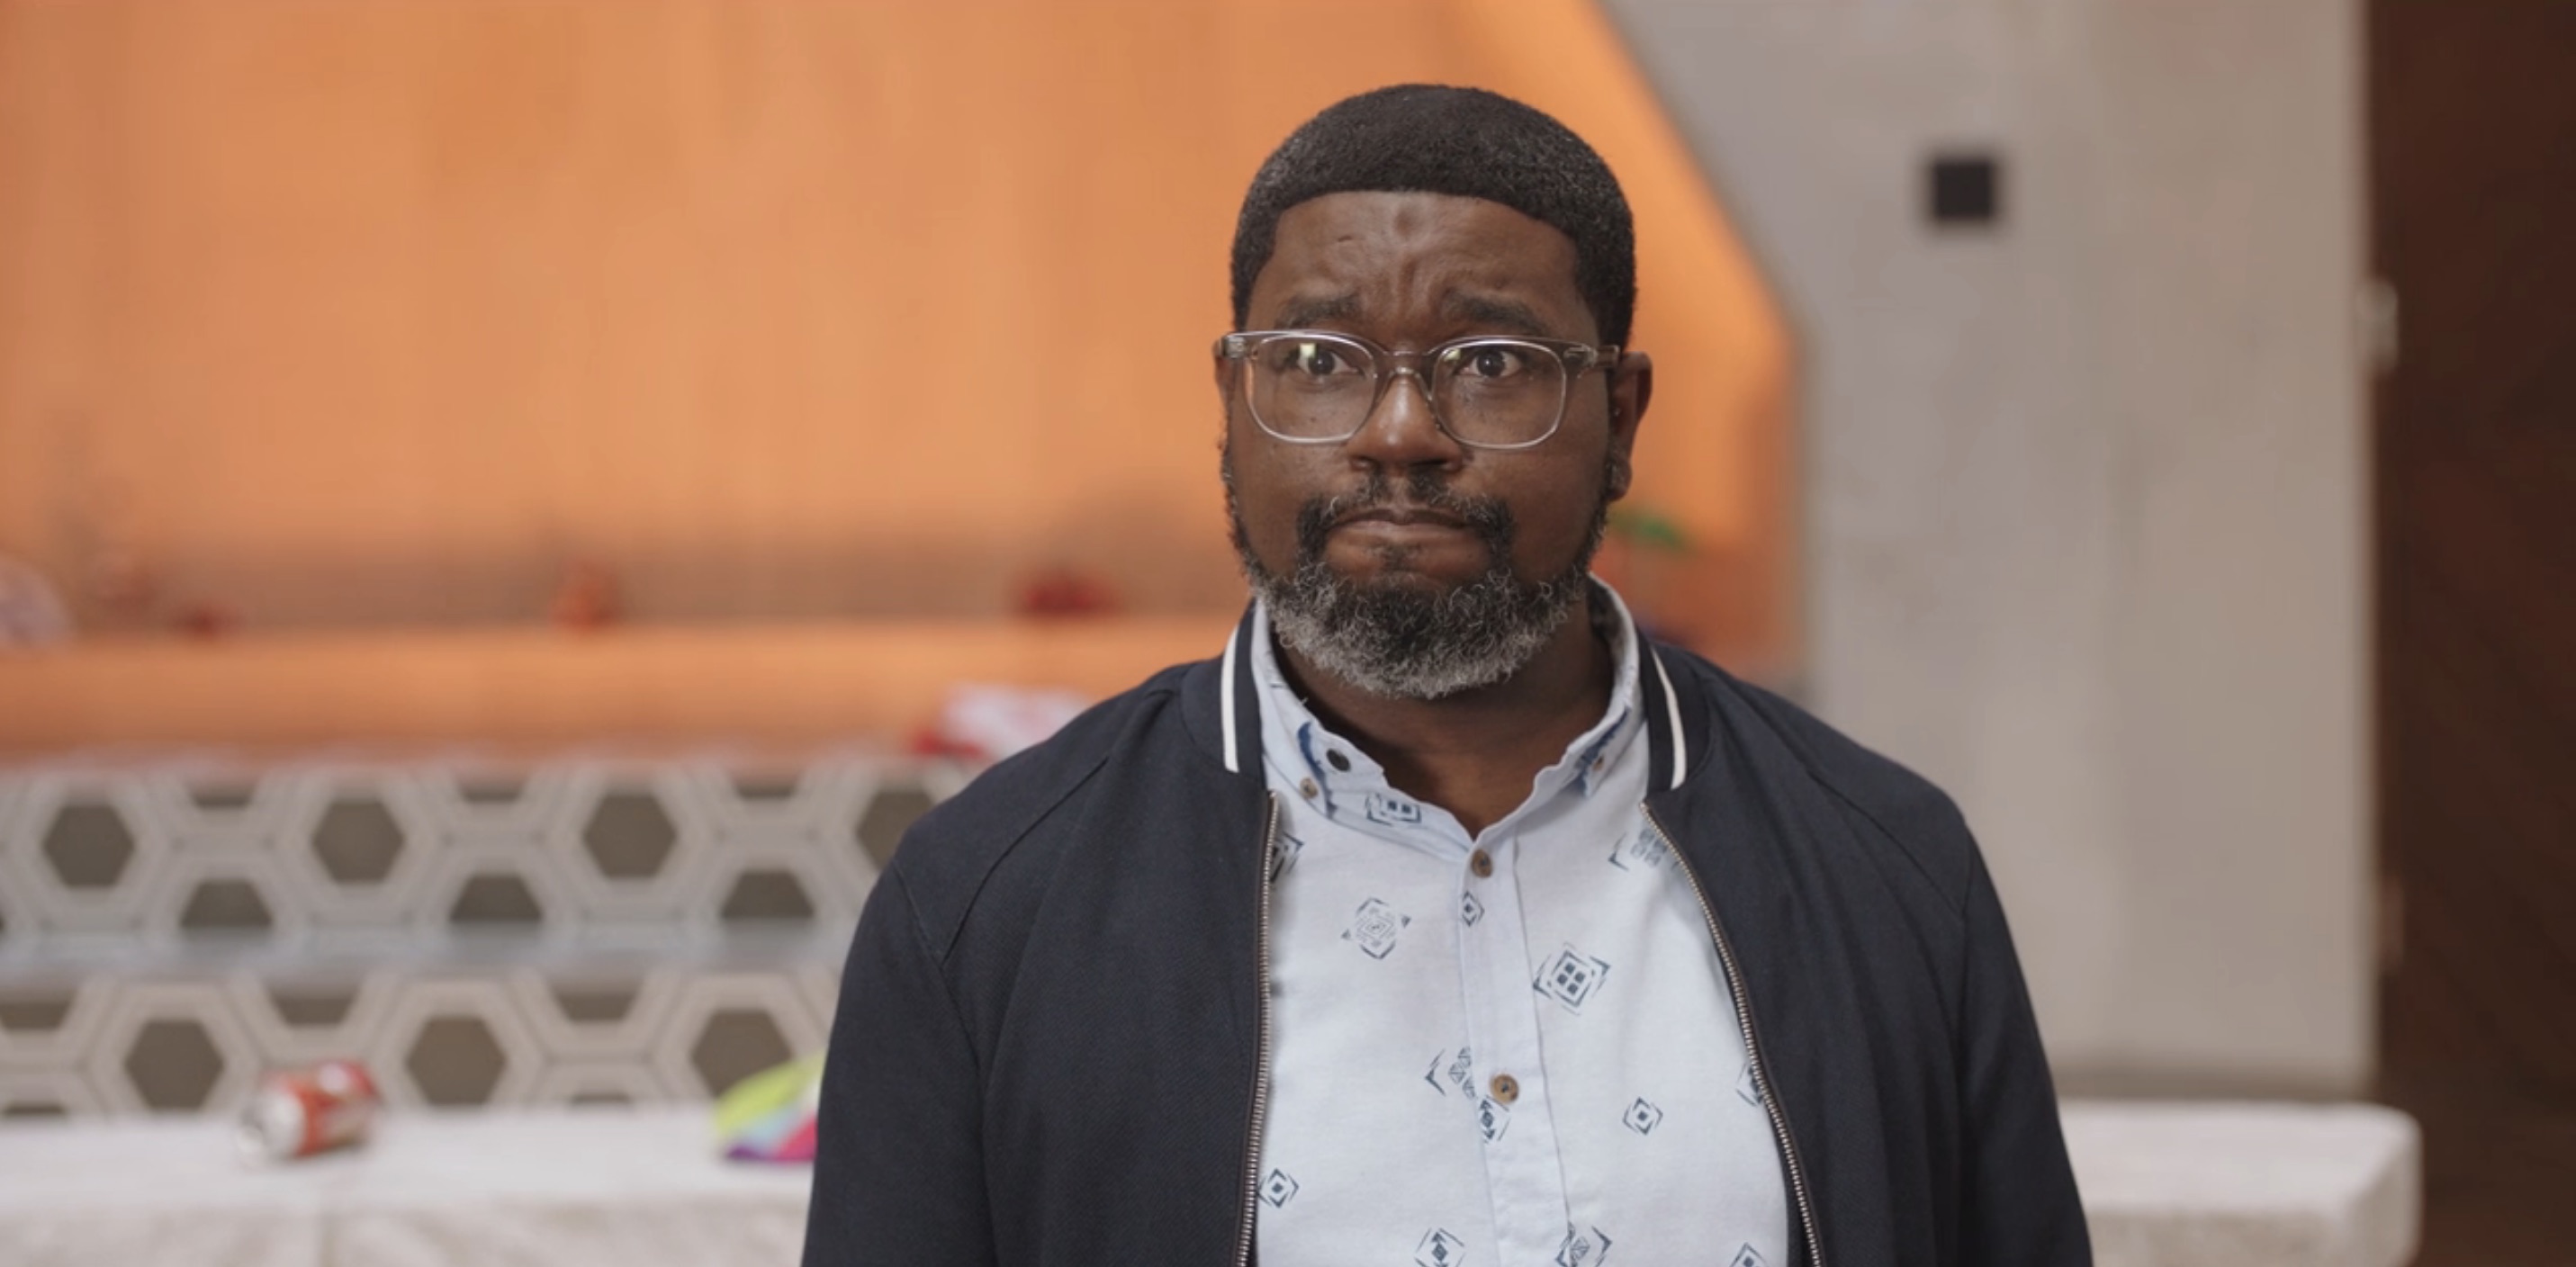 Vacation Friends Cast on Hulu - Lil Rel Howery as Marcus